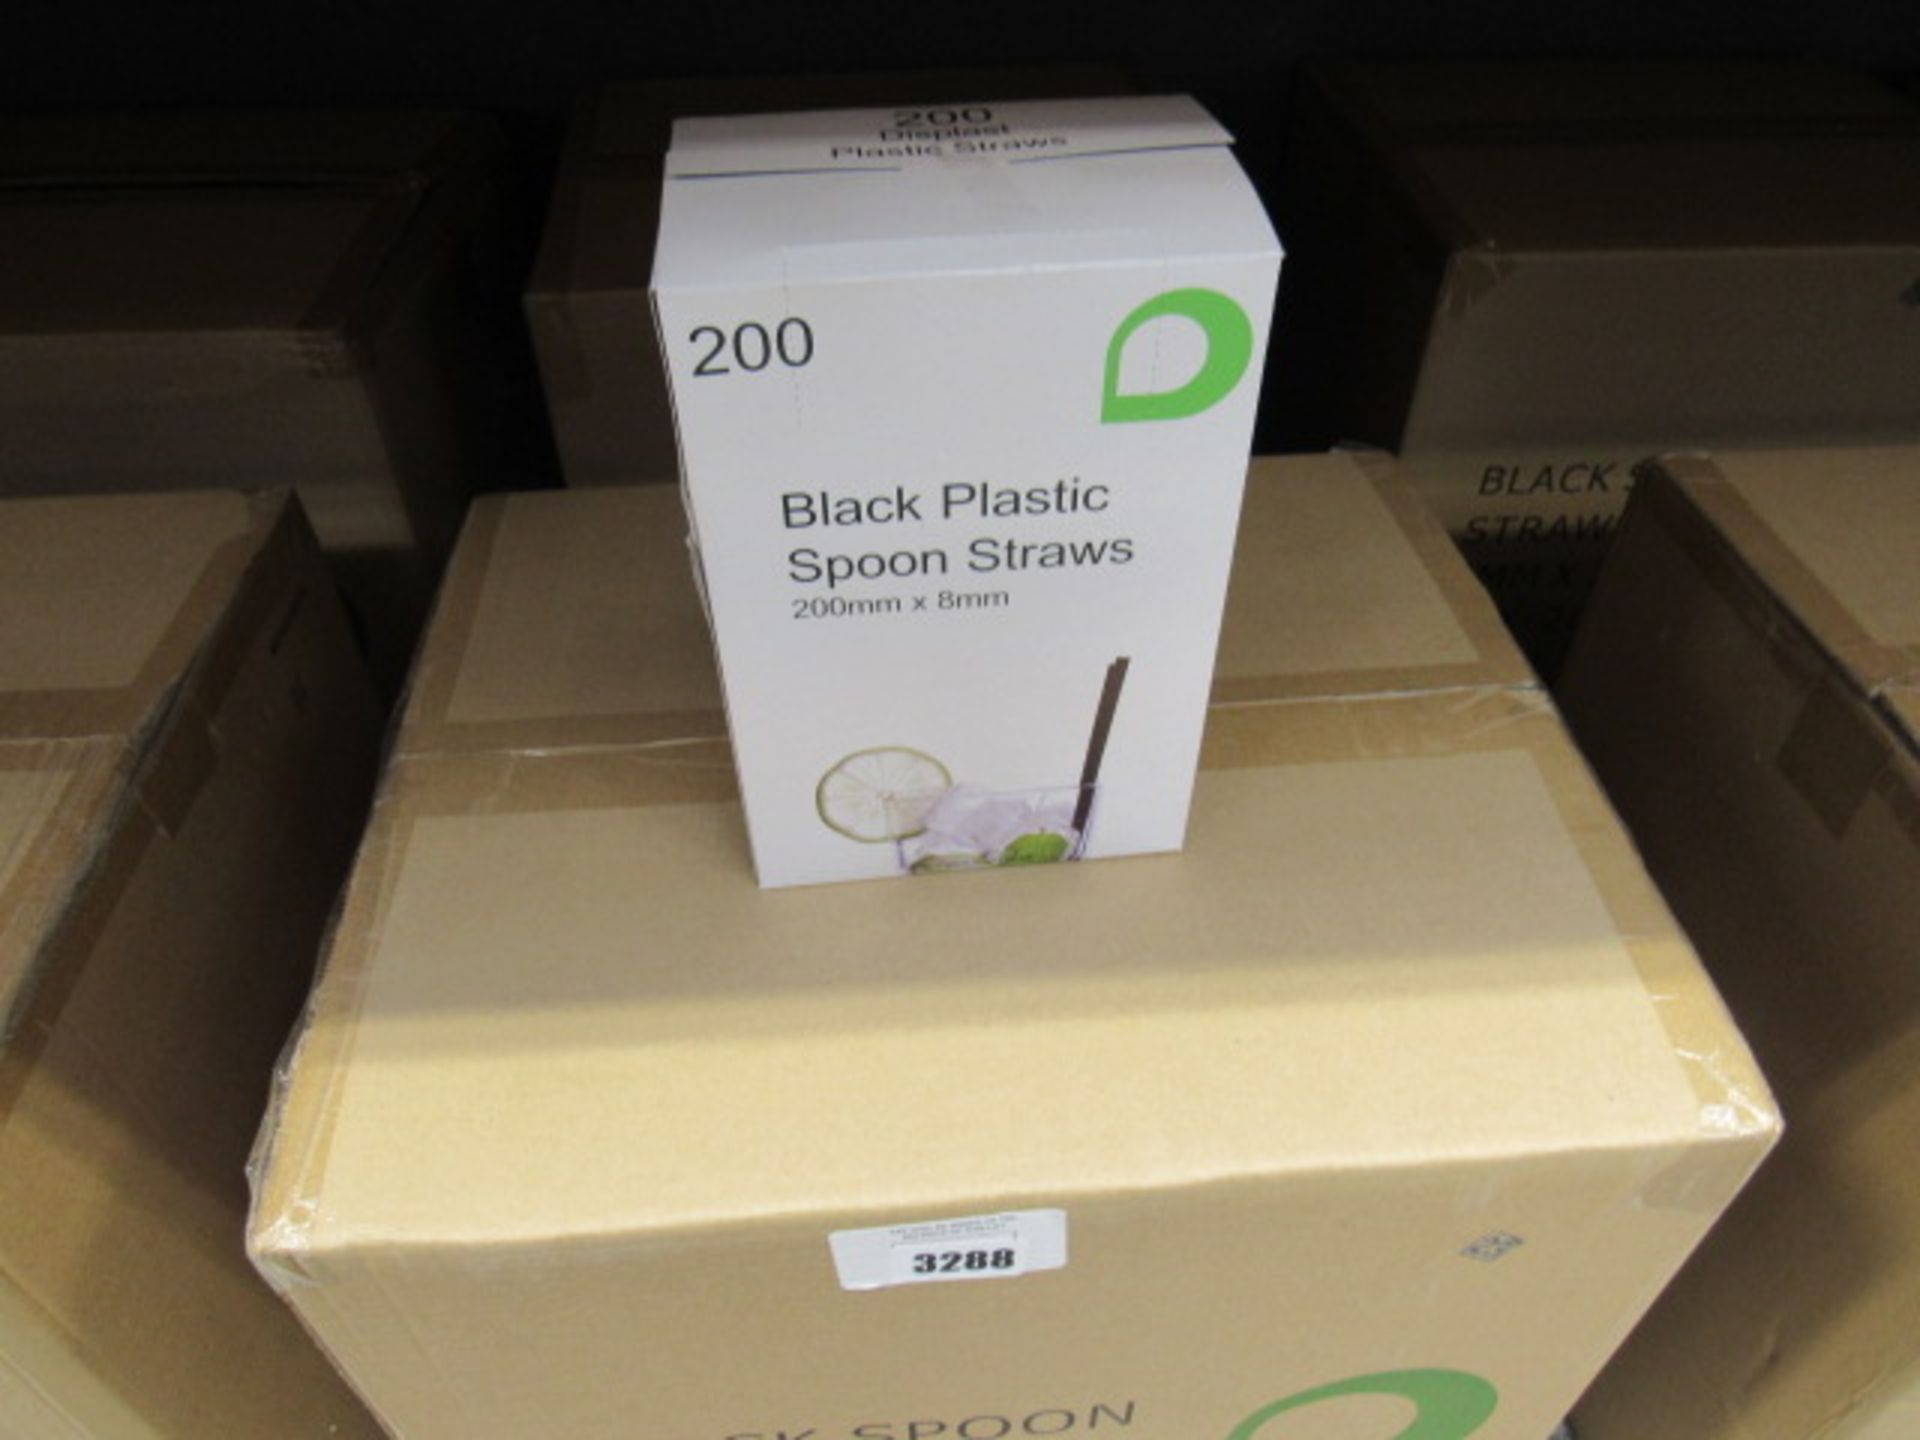 Two boxes containing black spoon straws